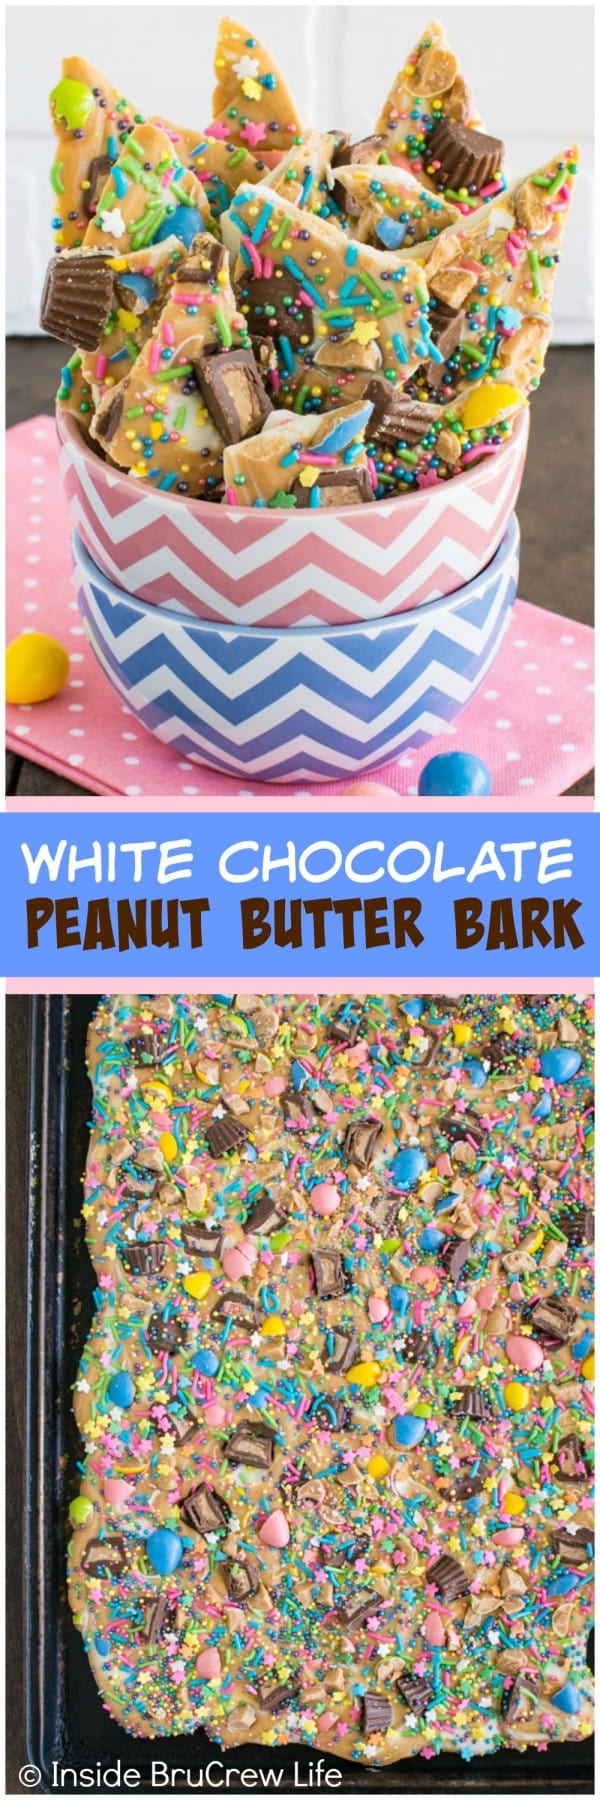 2 pictures of White Chocolate Peanut Butter Bark loaded with Easter sprinkles.